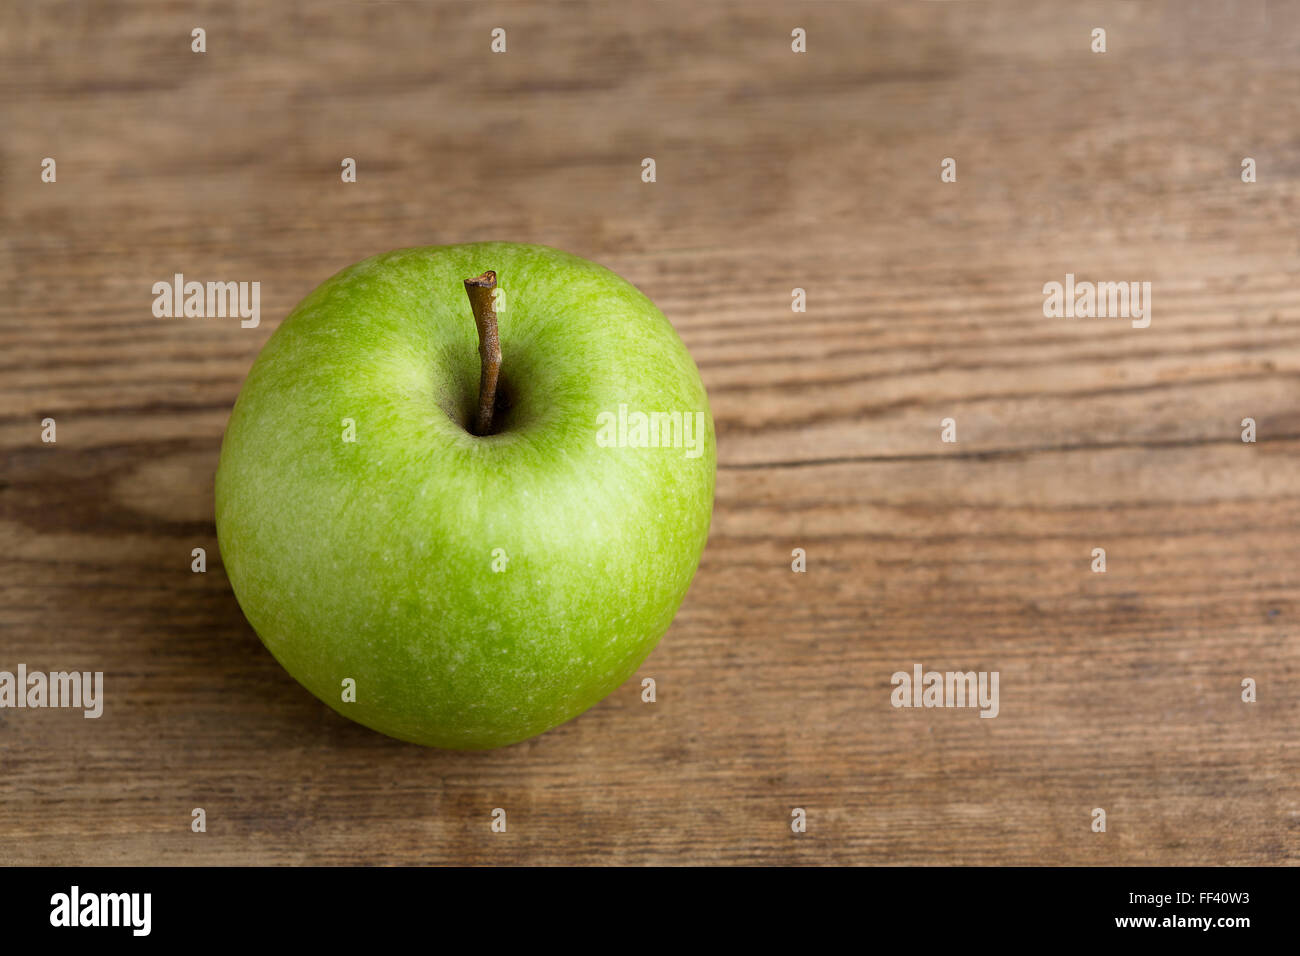 Green apple on wooden background, natural light Stock Photo